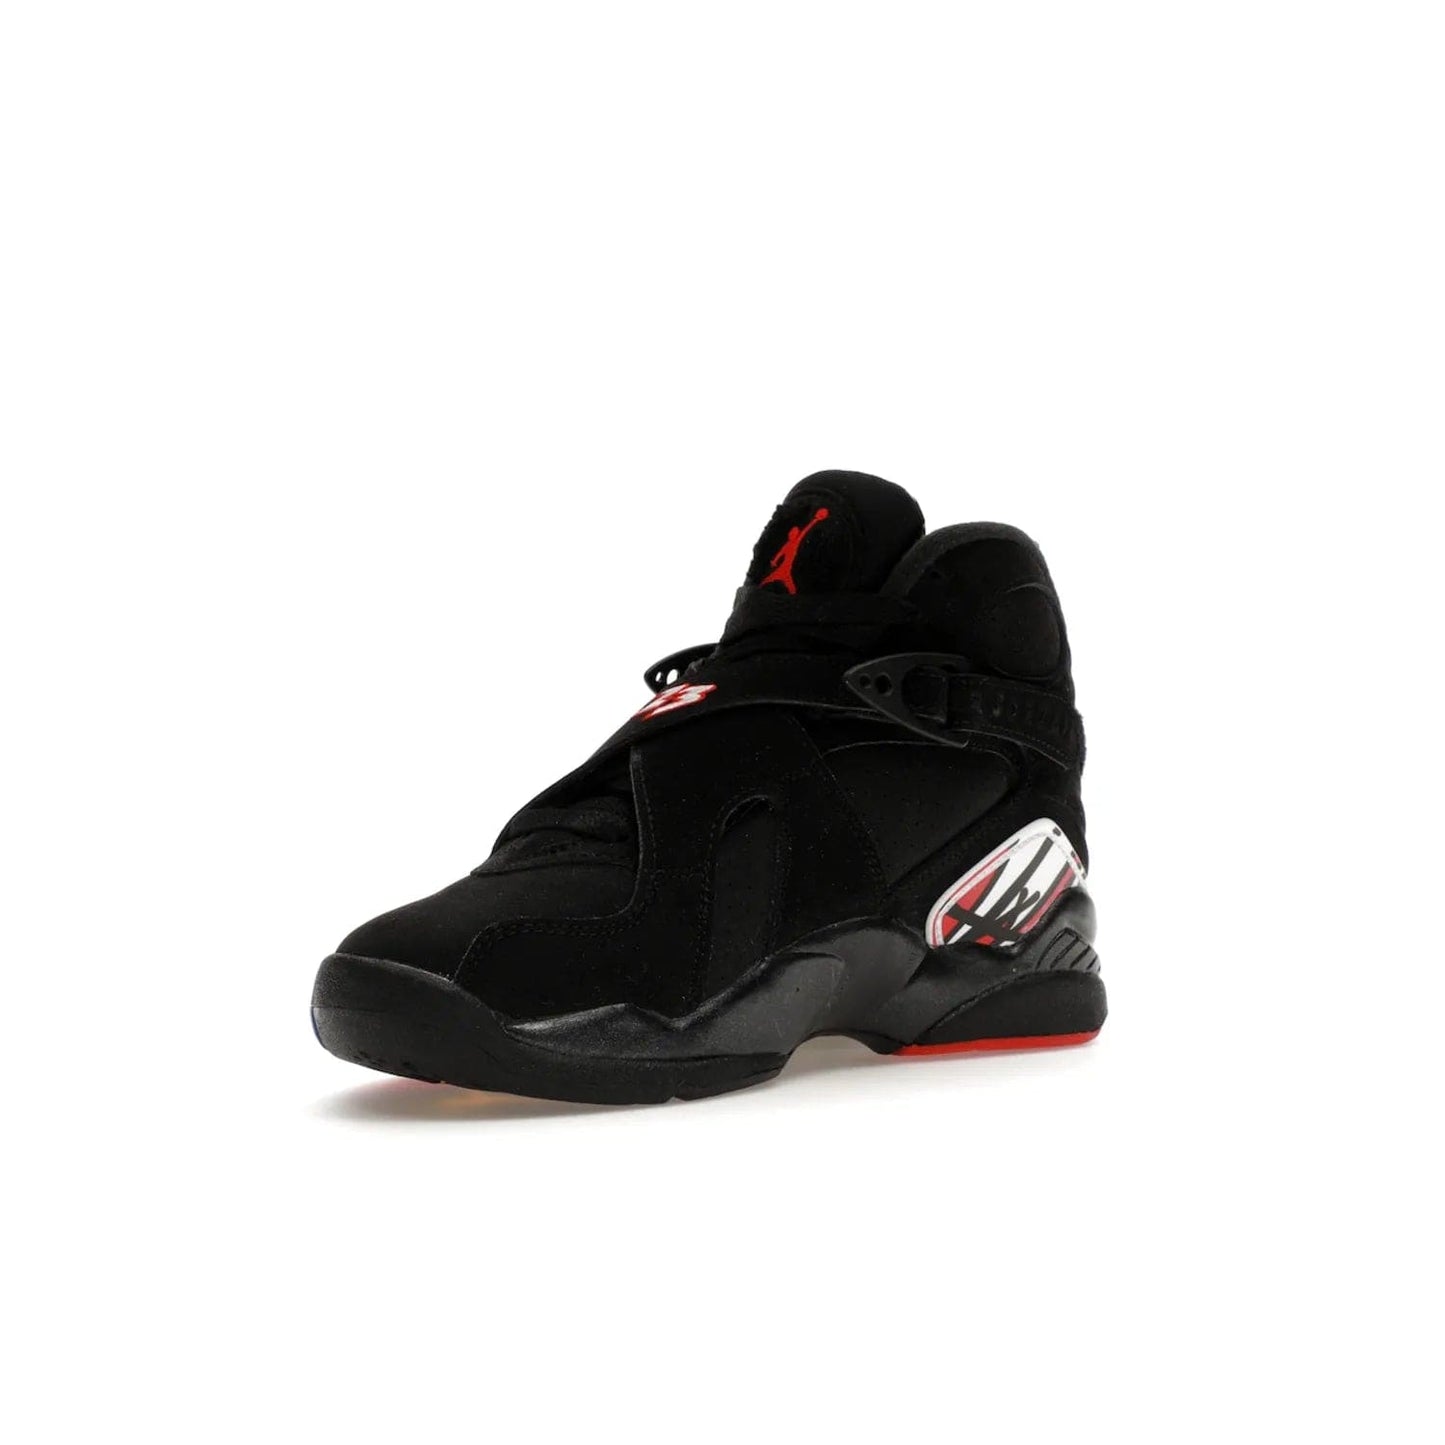 Jordan 8 Retro Playoffs (2023) (GS) - Image 15 - Only at www.BallersClubKickz.com - Sneaker lovers, the new Jordan 8 Retro Playoffs (2023) (GS) features black, true red, and white colors for a modern and eye-catching design. Comfort and style combine for an unforgettable look, releasing in 2023.